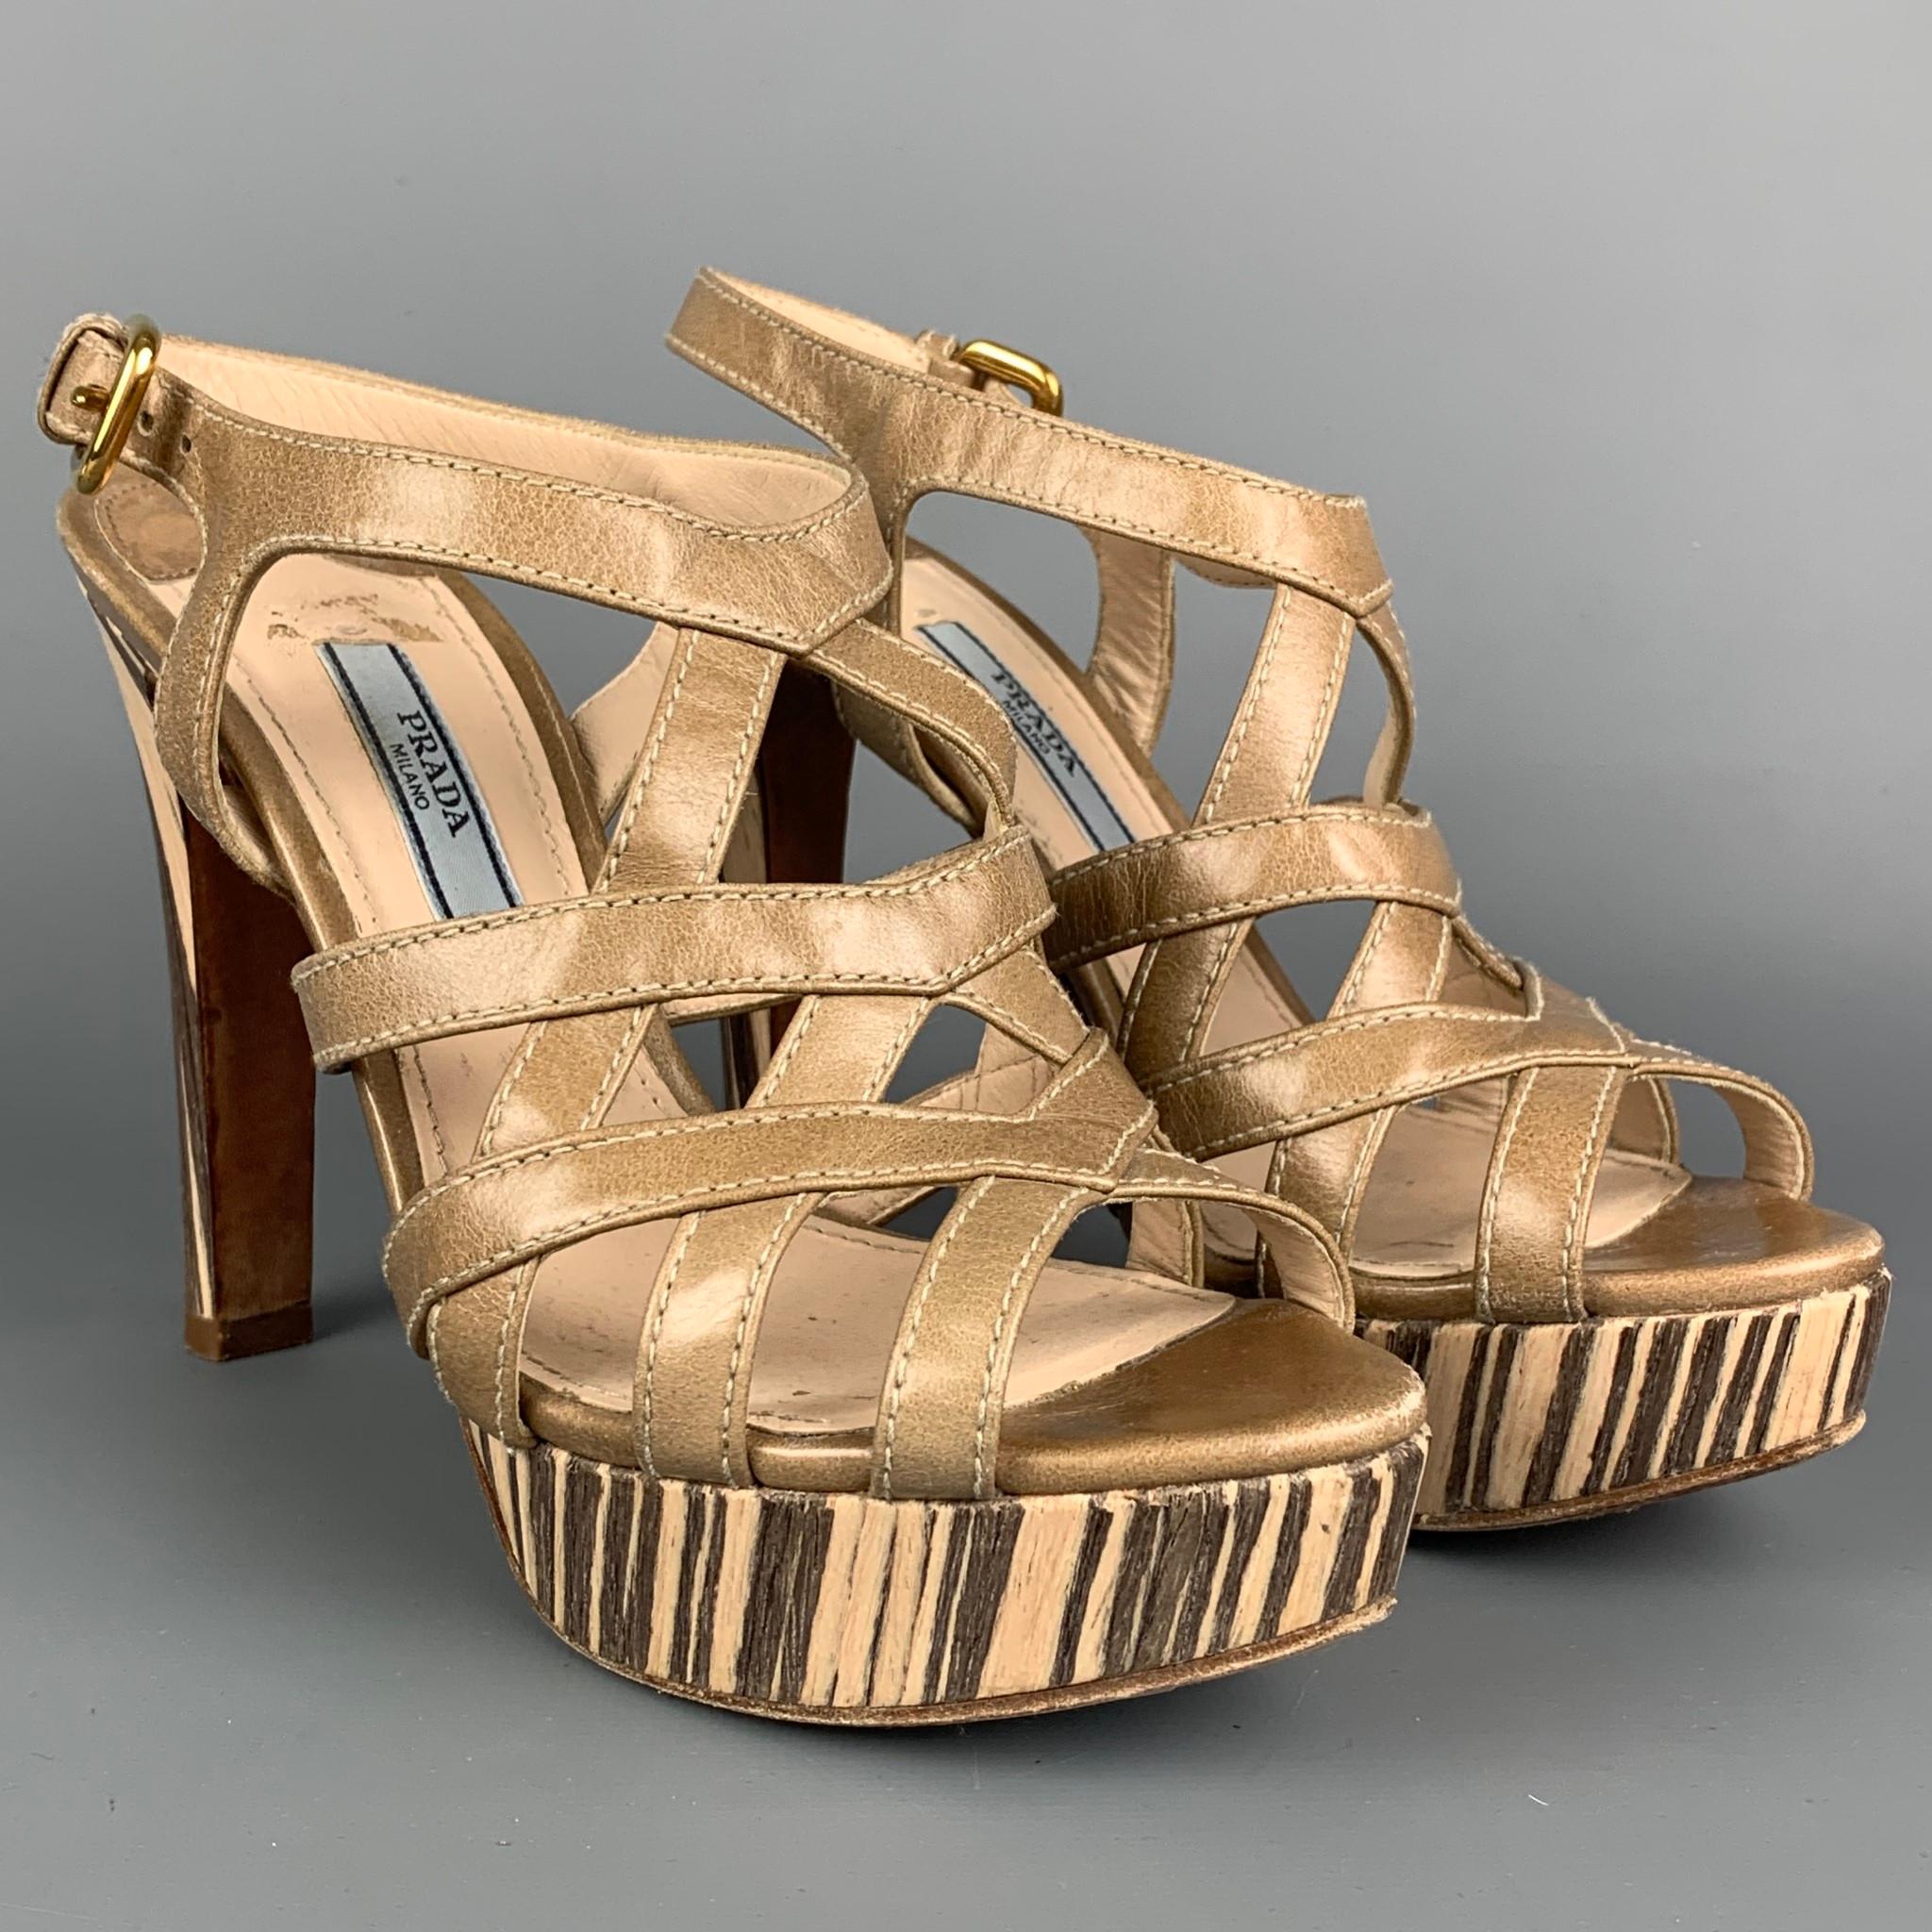 PRADA sandals comes in a taupe & beige with a wood print trim featuring a platform style, criss cross strap, ankle buckle closure, and a chunky heel. Made in Italy. 

Very Good Pre-Owned Condition.
Marked: 36.5

Measurements:

Heel: 4.5 in. 